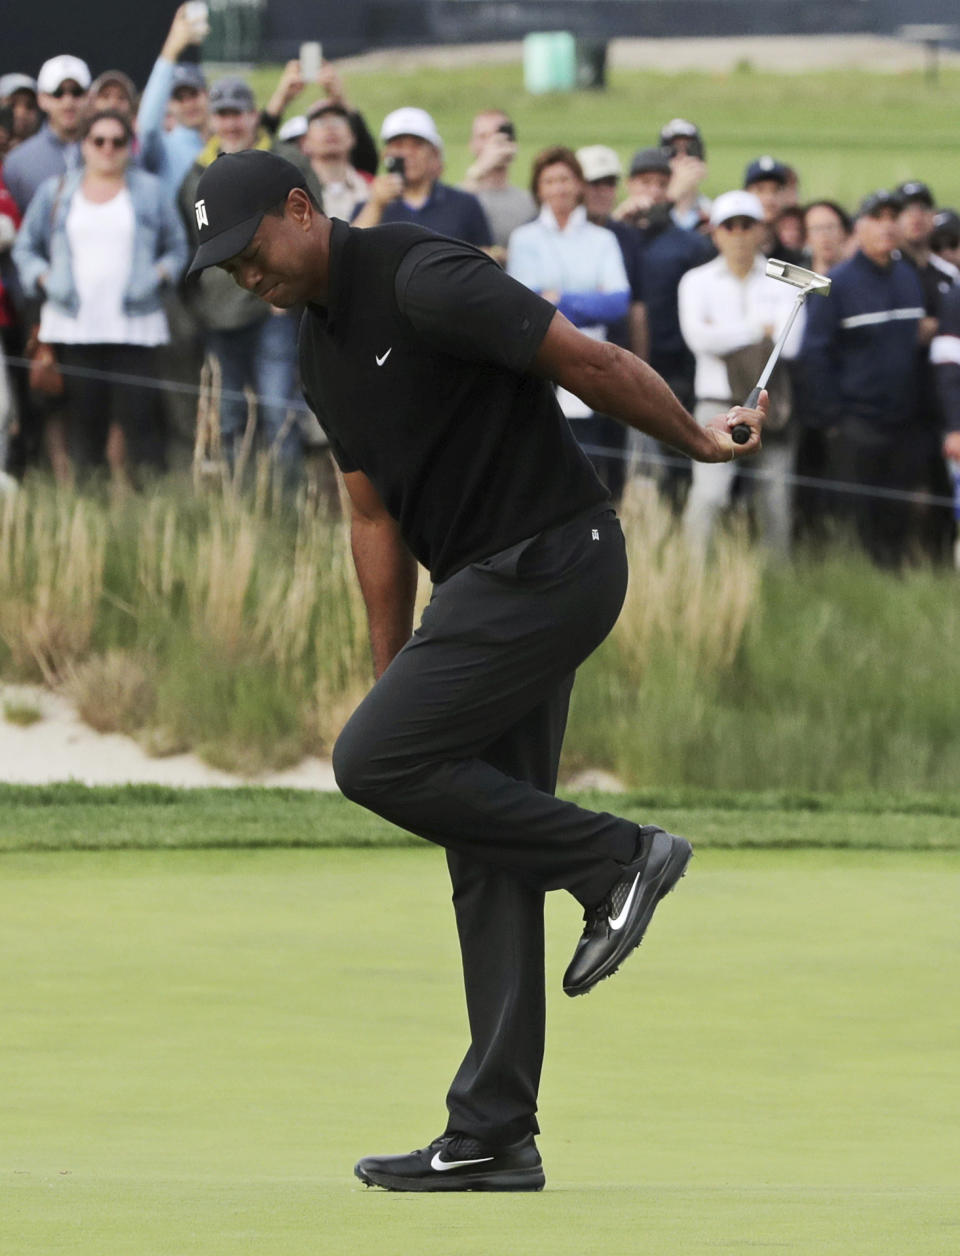 Tiger Woods reacts after missing a putt for birdie on the 17th green during the second round of the PGA Championship golf tournament, Friday, May 17, 2019, at Bethpage Black in Farmingdale, N.Y. (AP Photo/Charles Krupa)